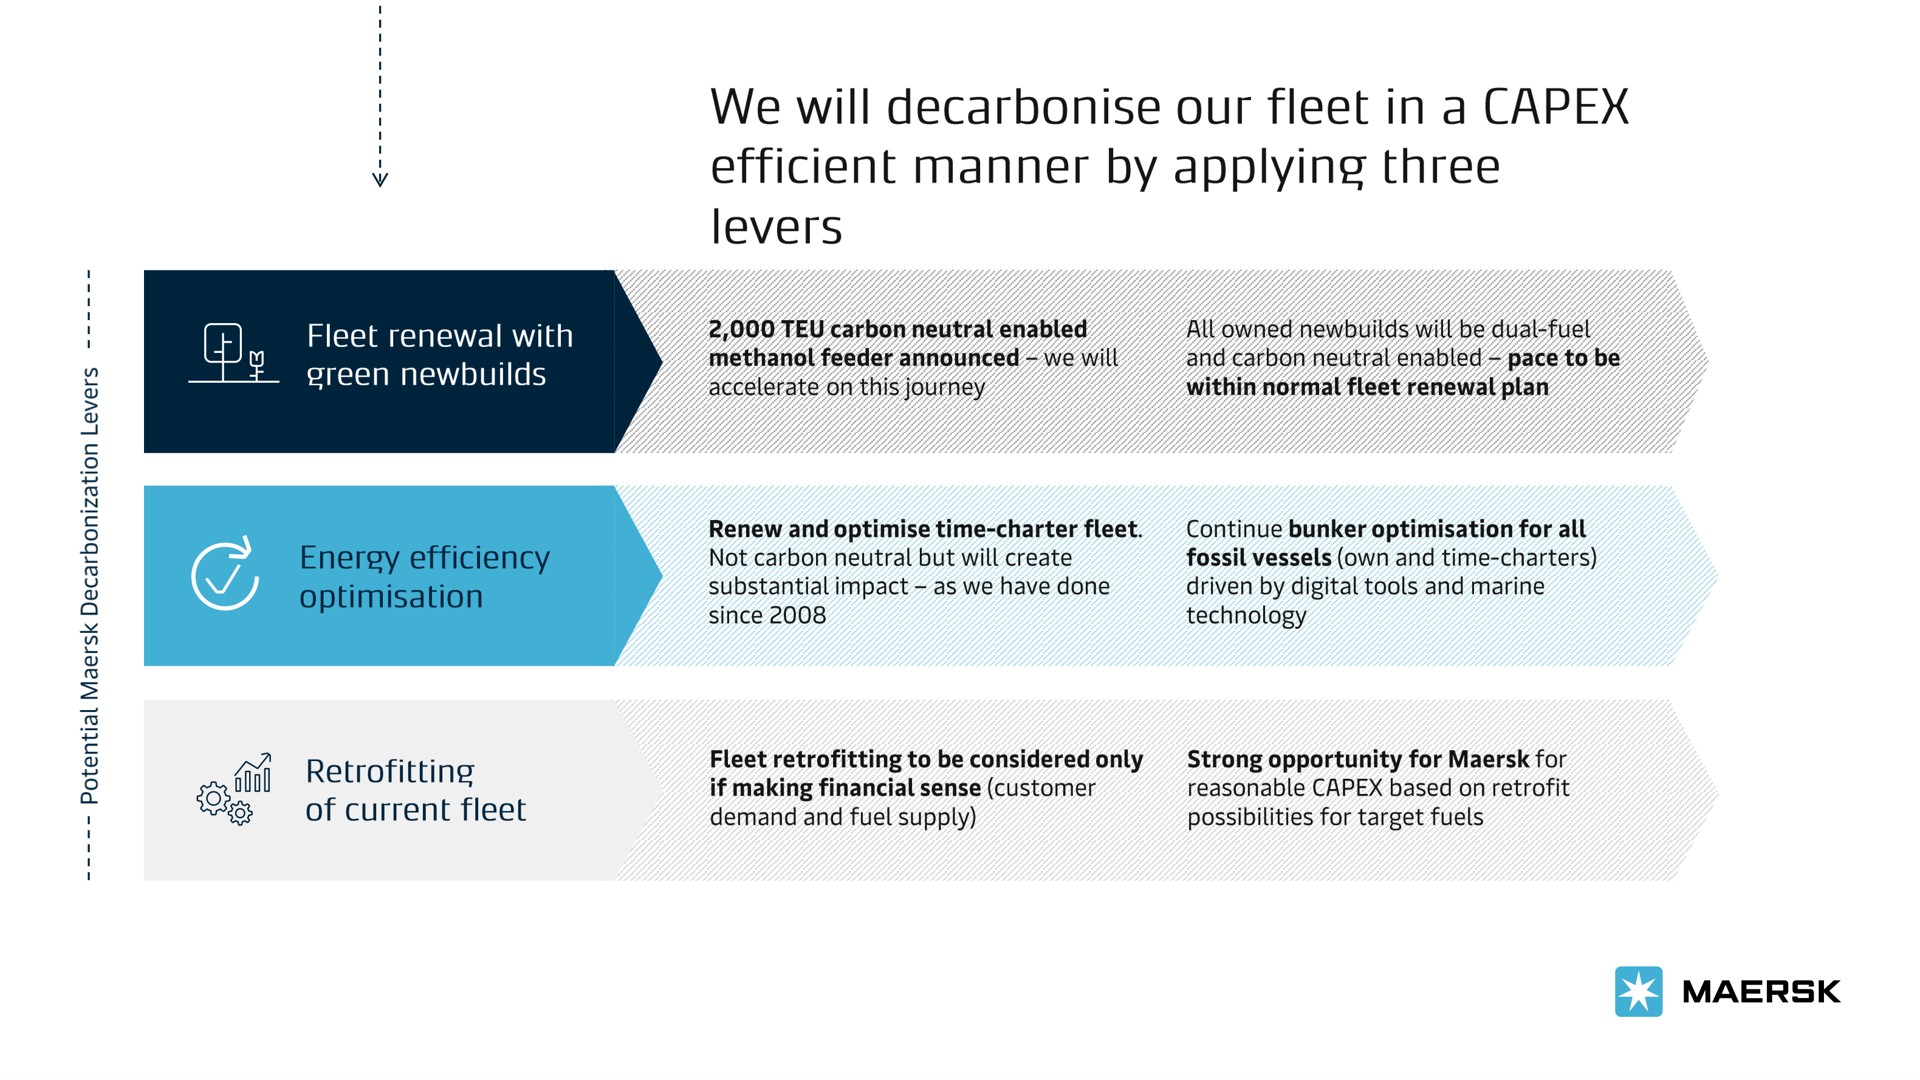 we will our fleet in a efficient manner by applying three levers | Maersk